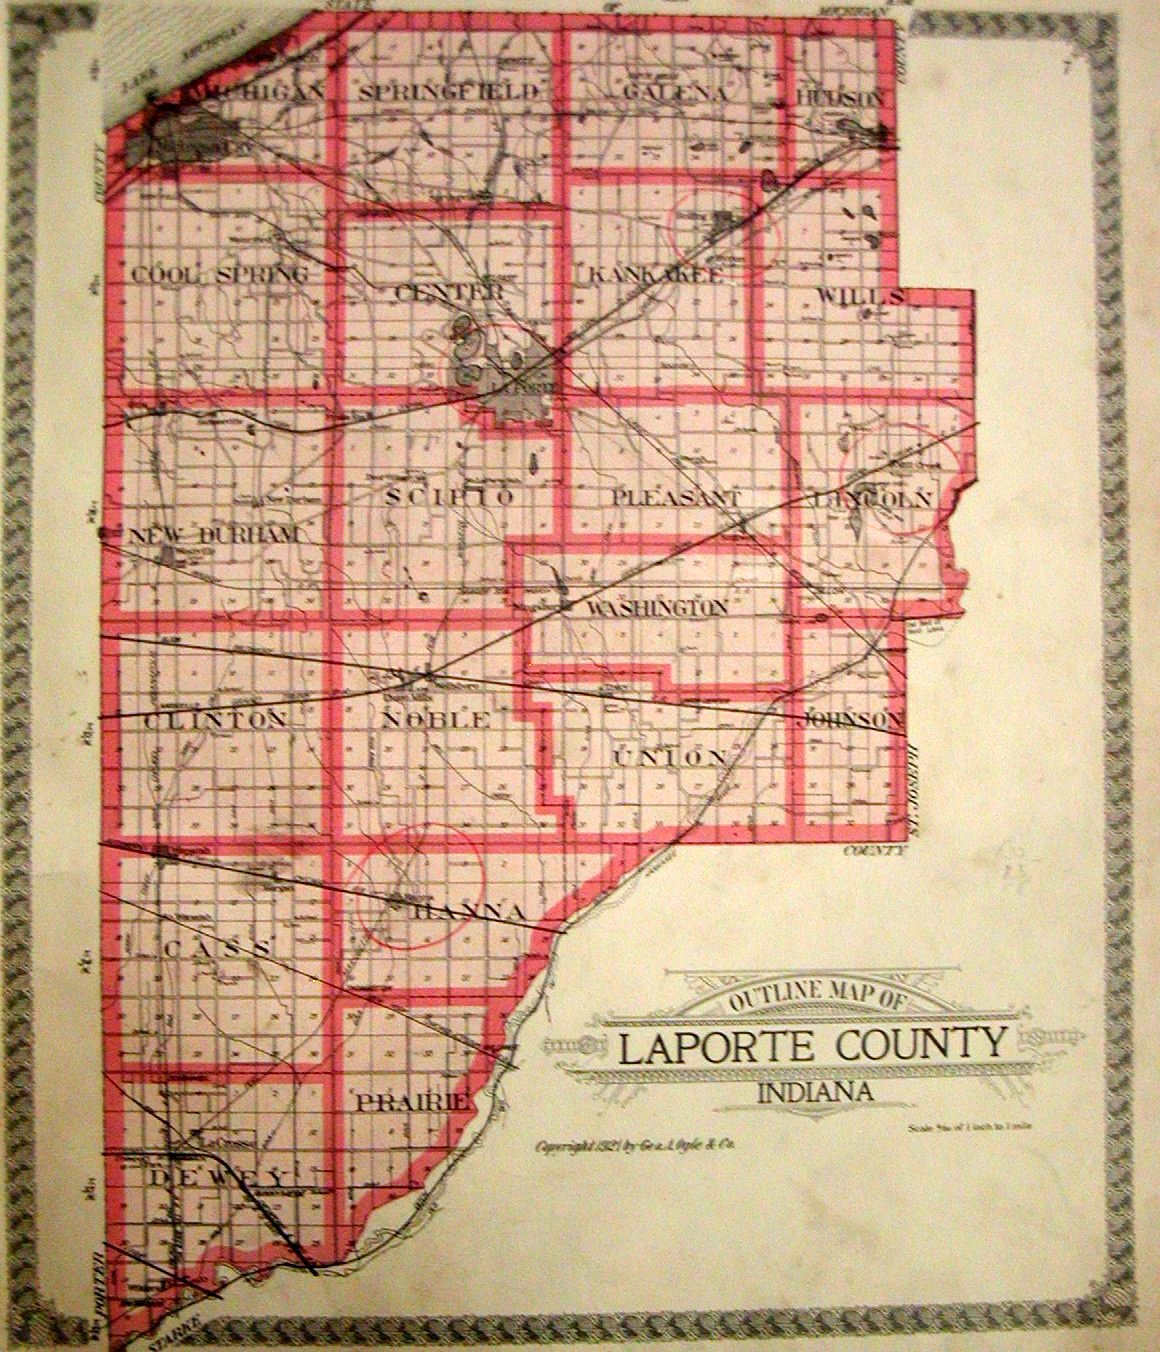 All Township 1921 maps